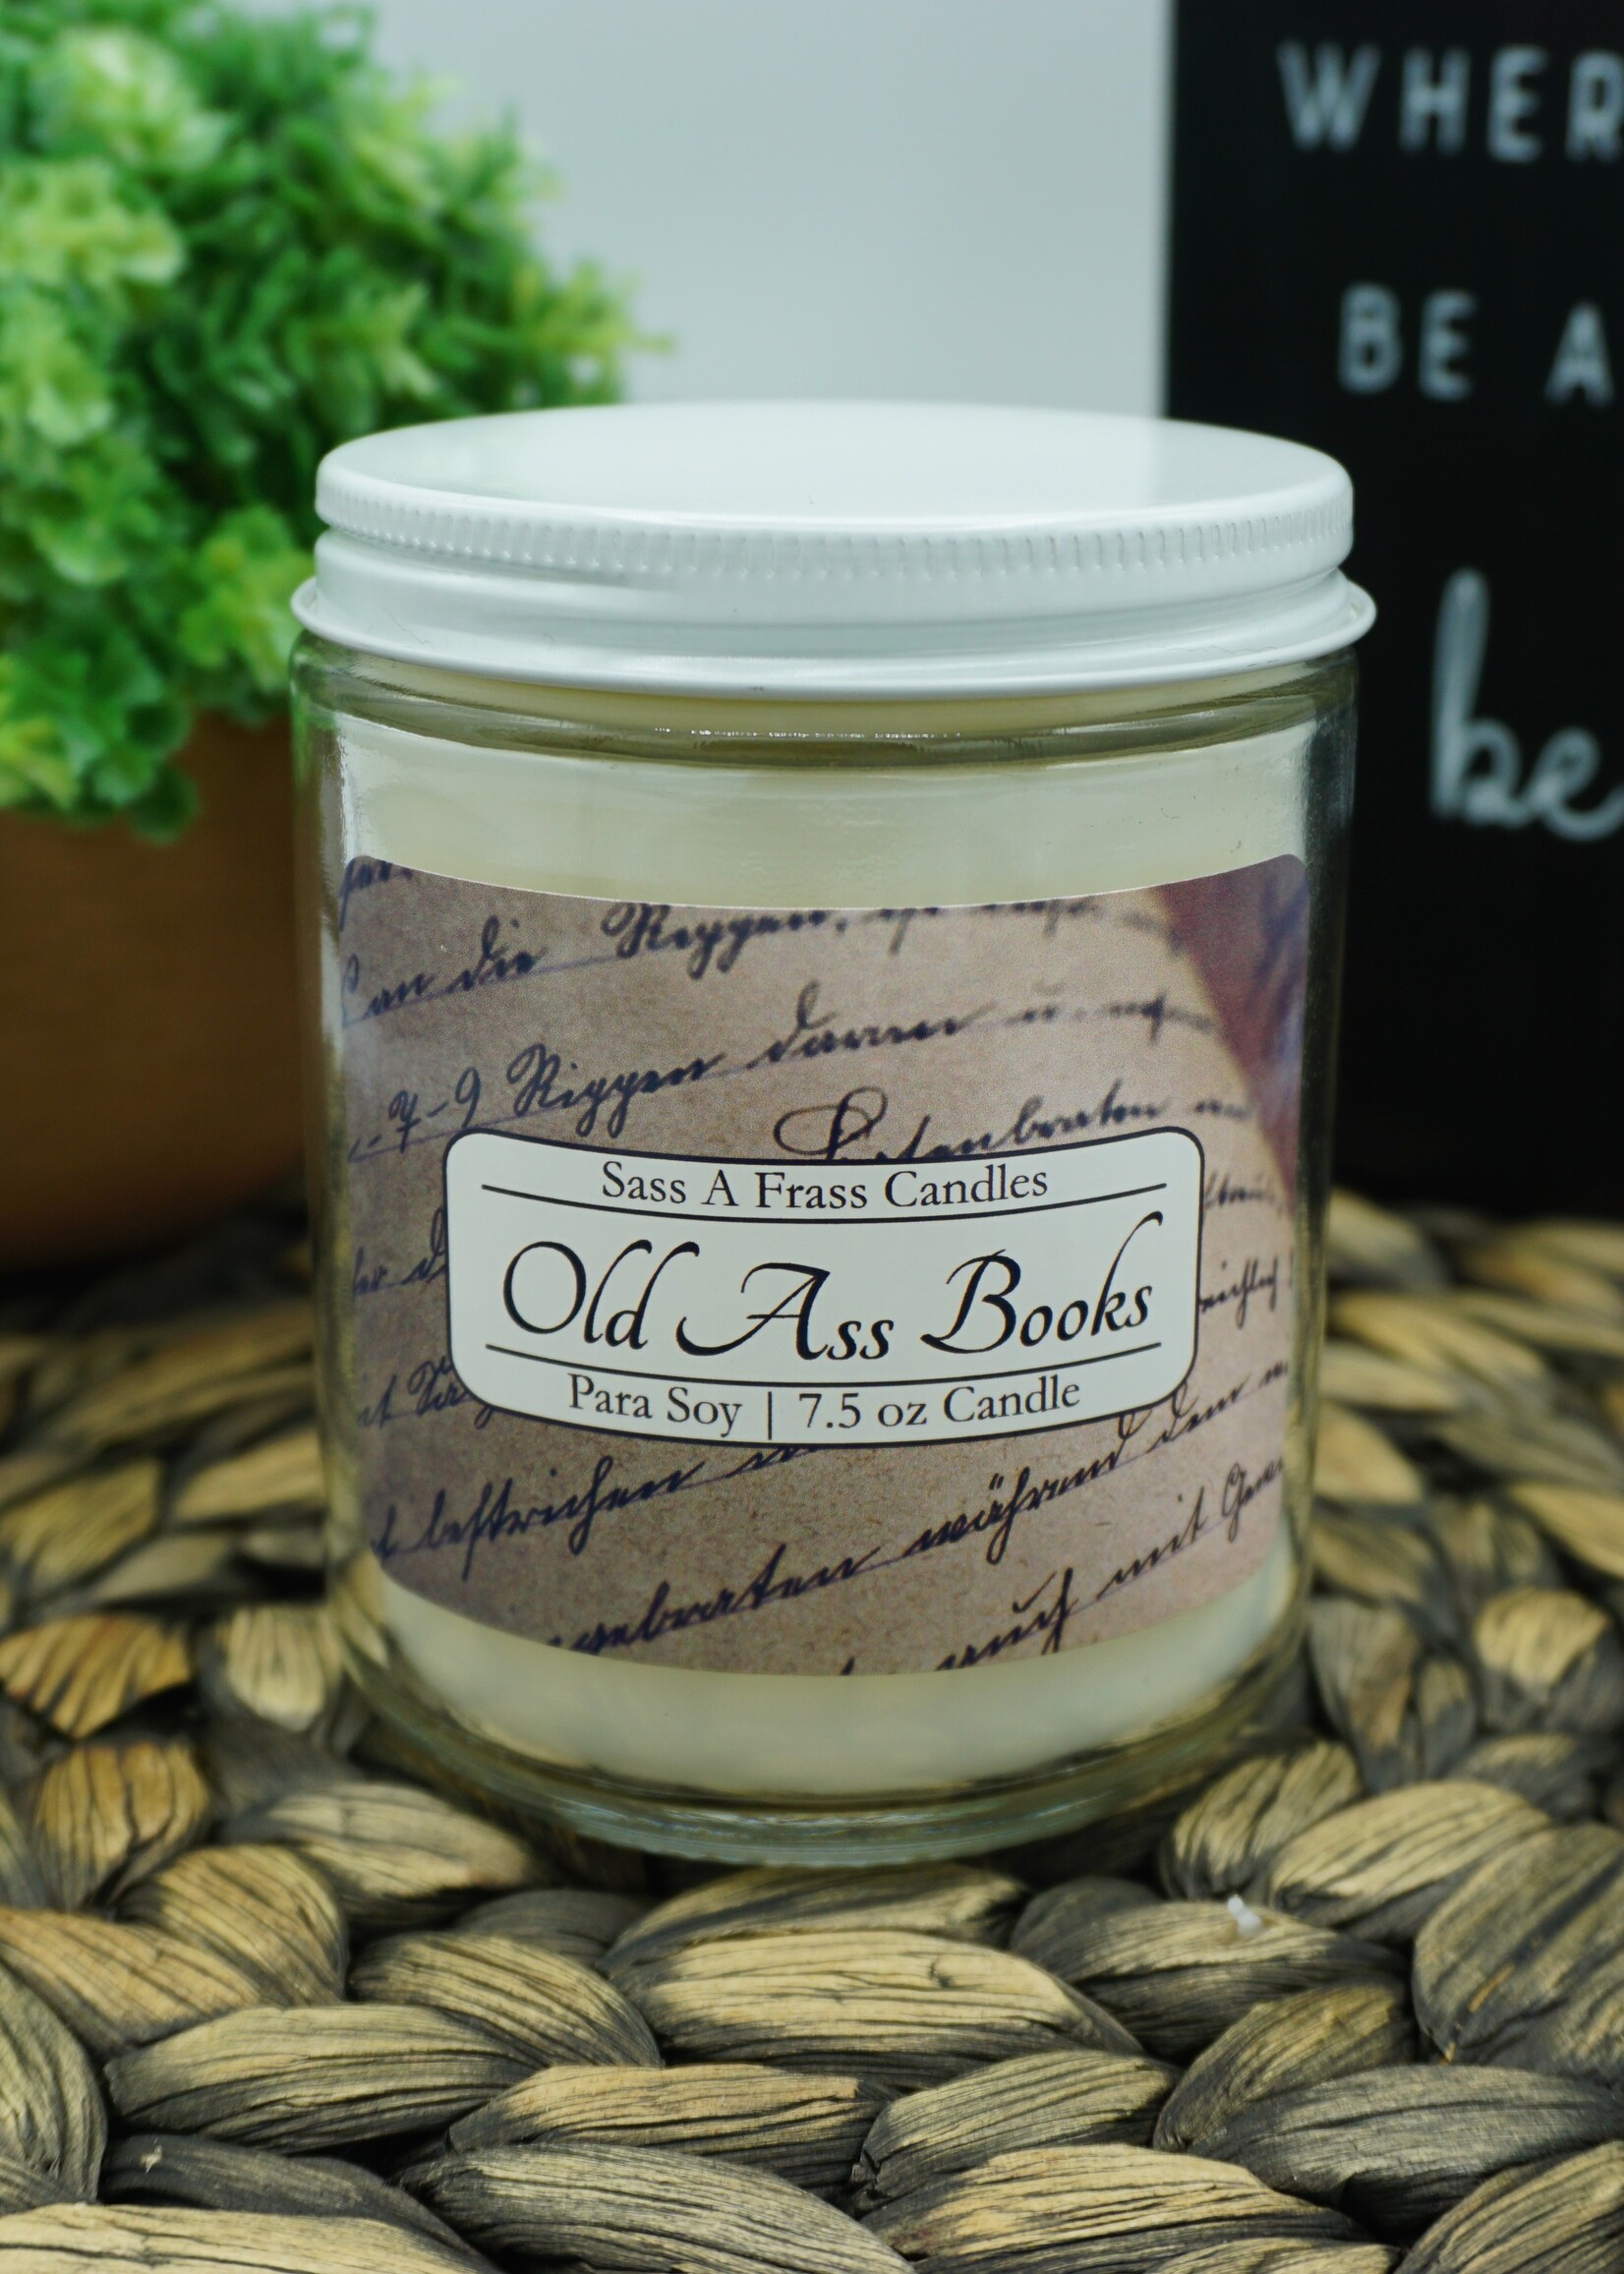 Old Ass Books 7.5 oz Candle